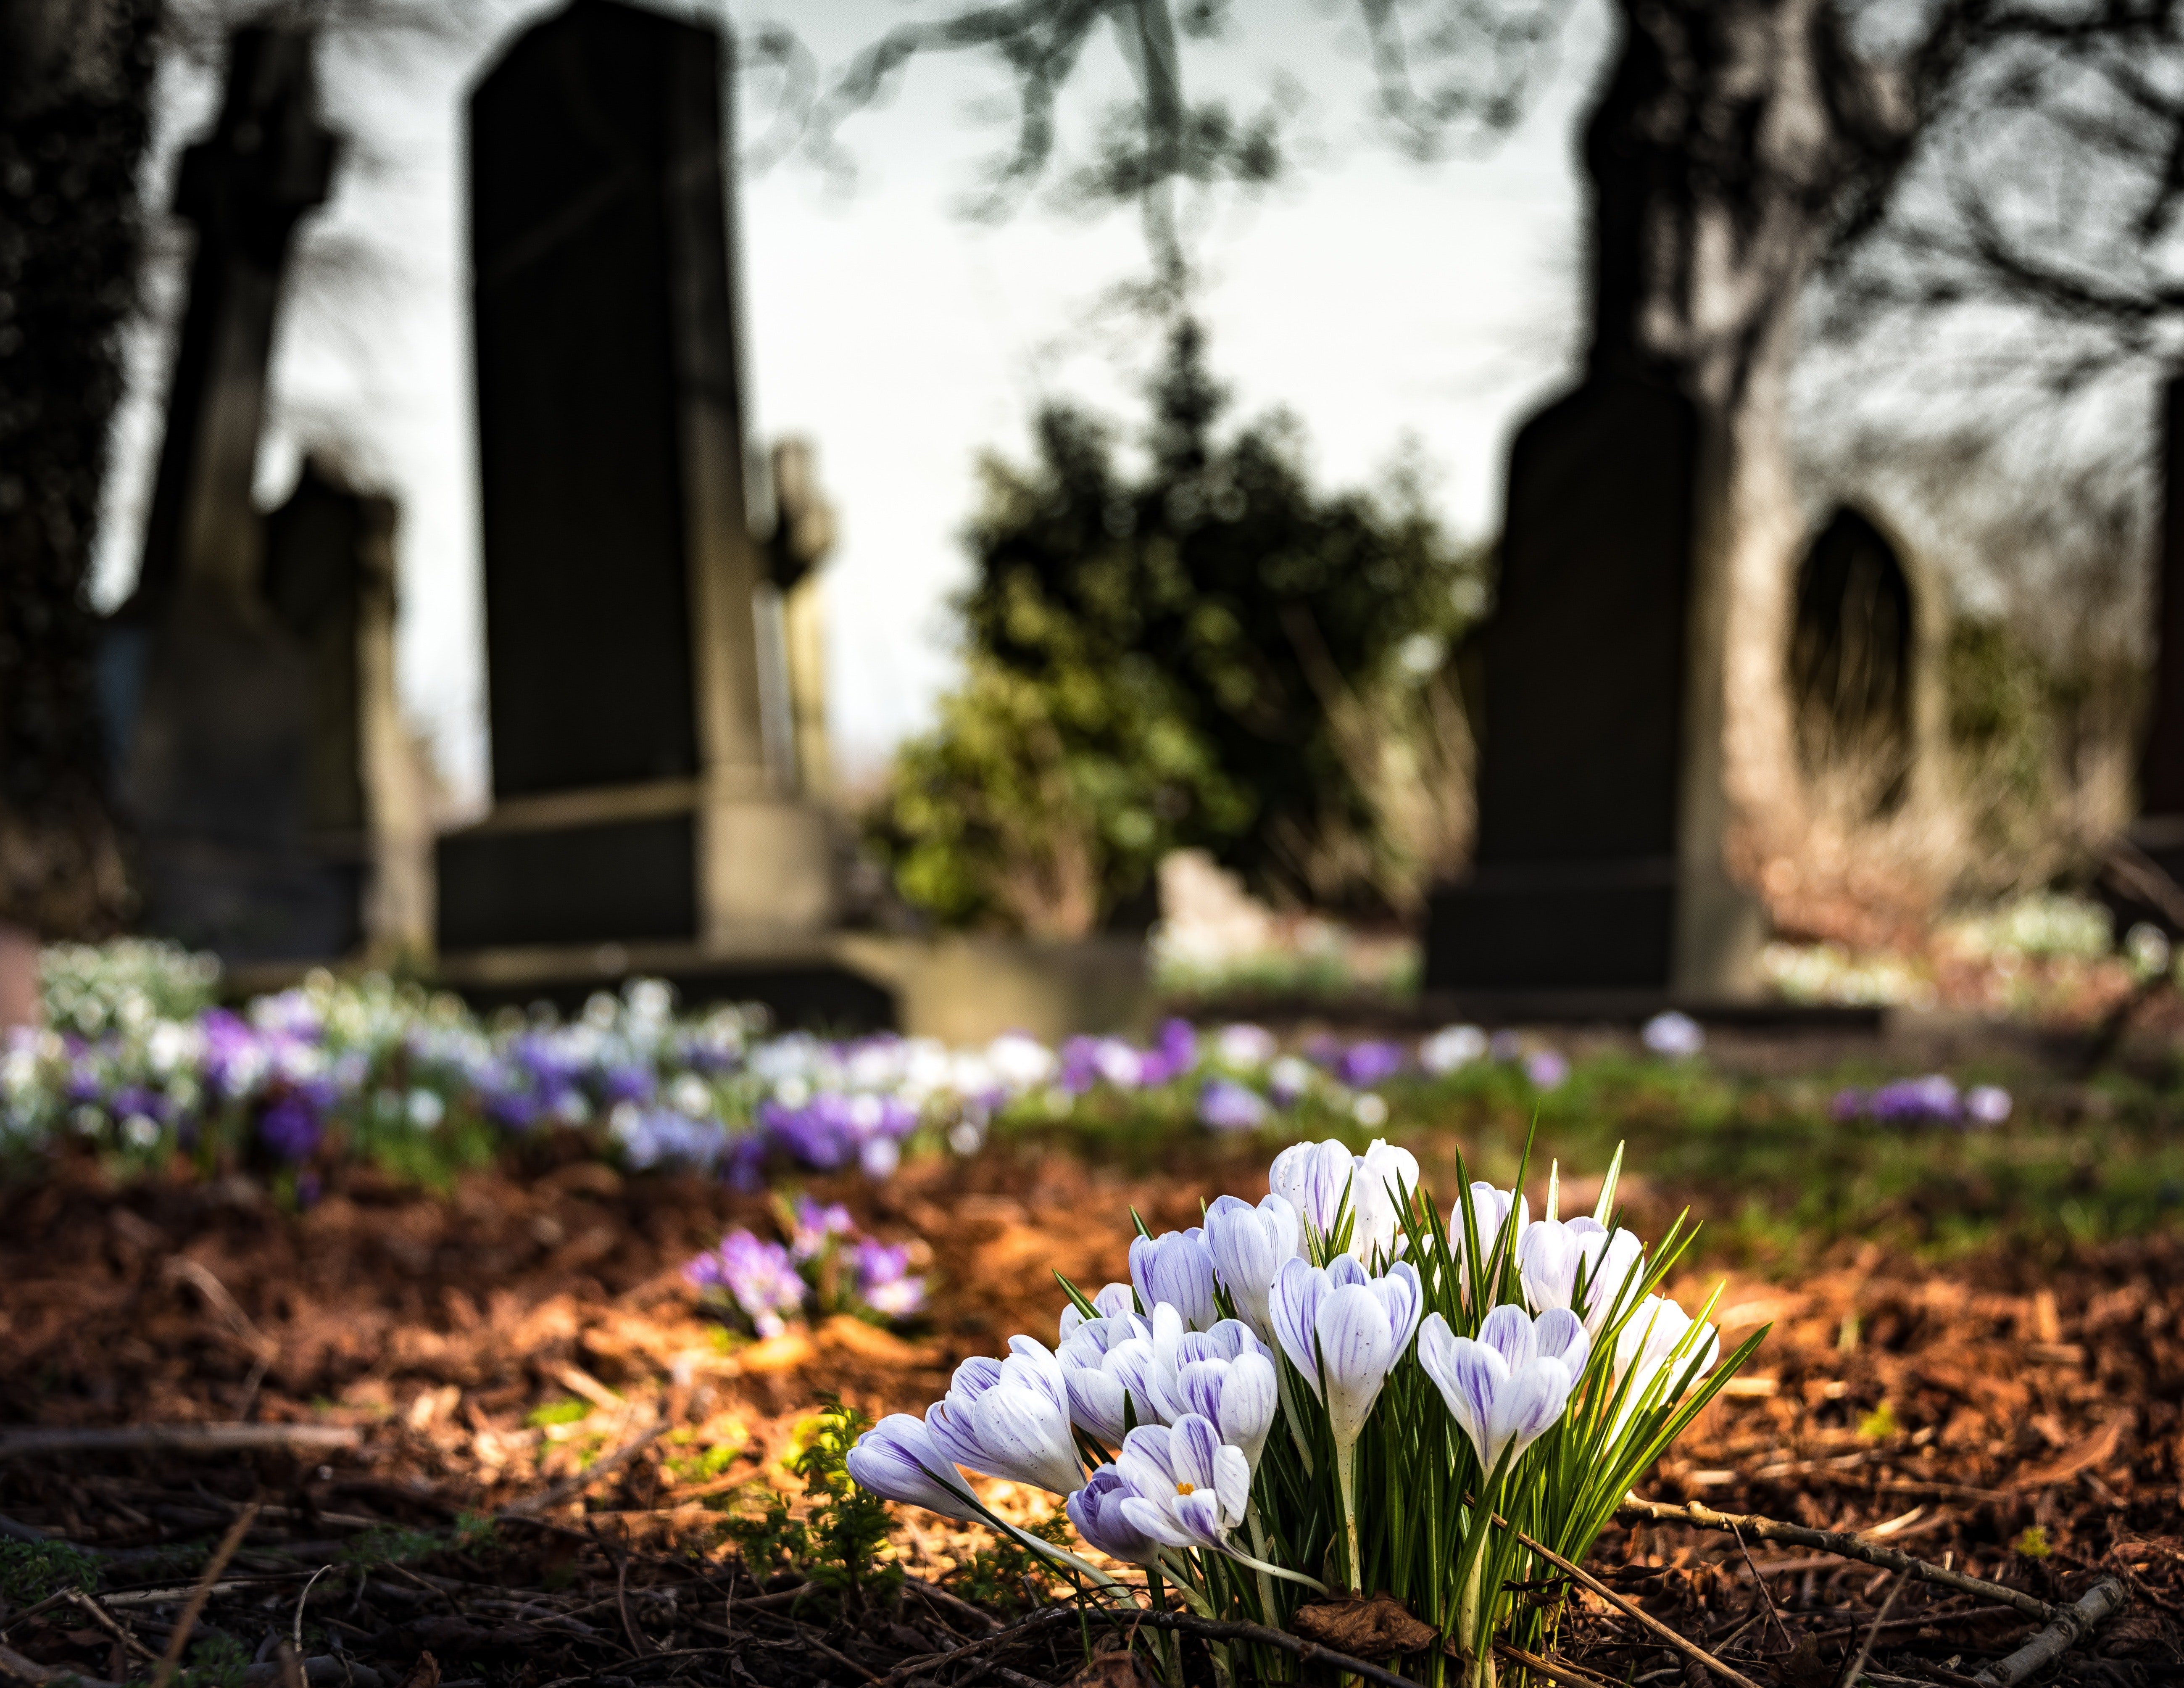 Jane visited her parents' grave every week, only to see another woman there one day. | Source: Pexels